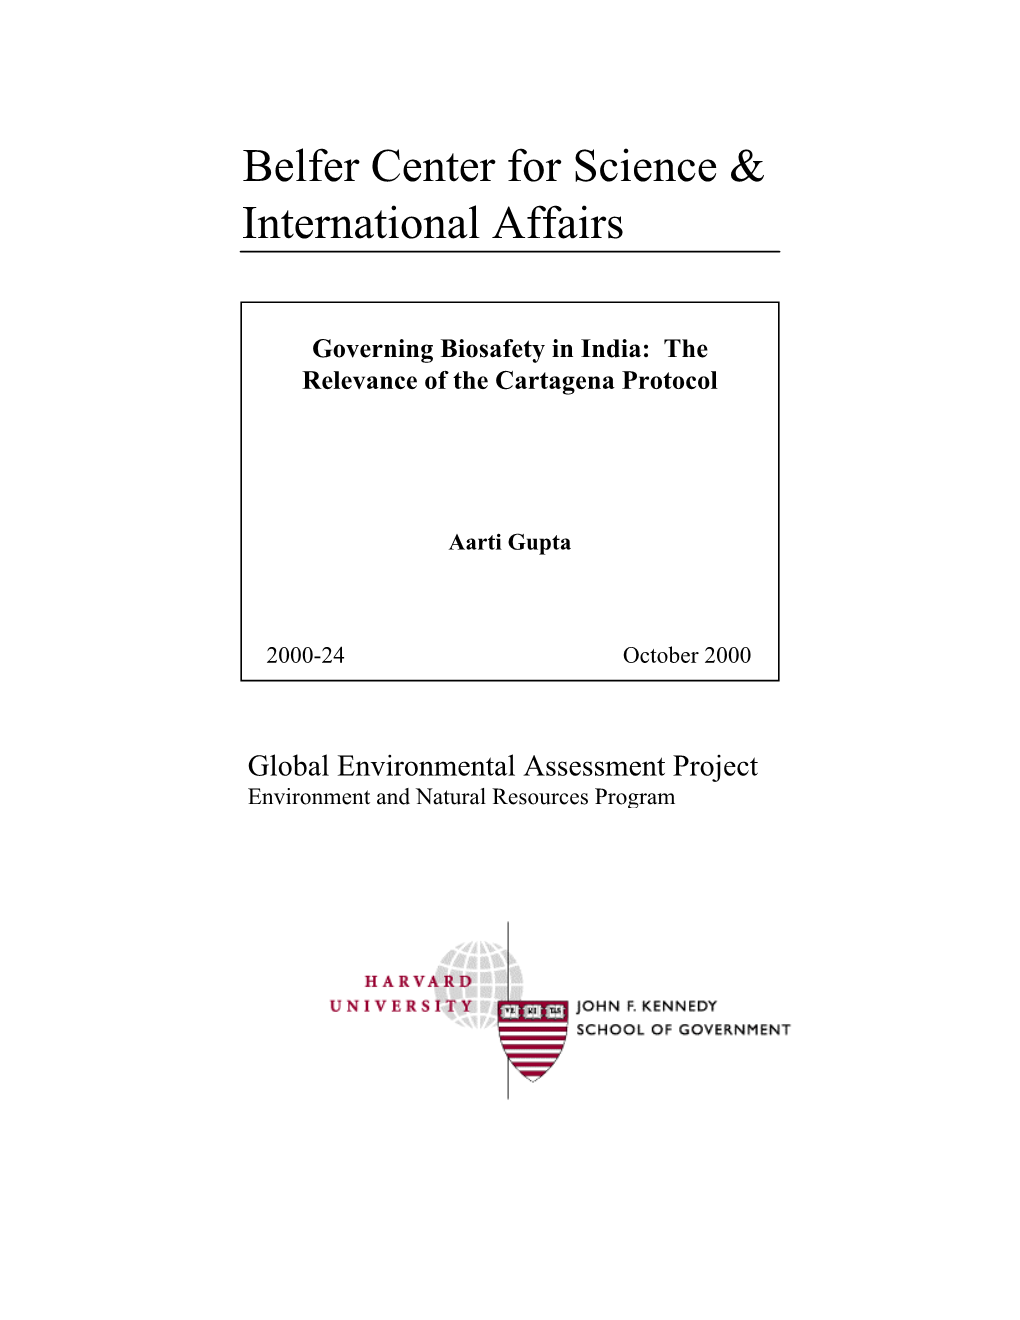 Governing Biosafety in India: the Relevance of the Cartagena Protocol